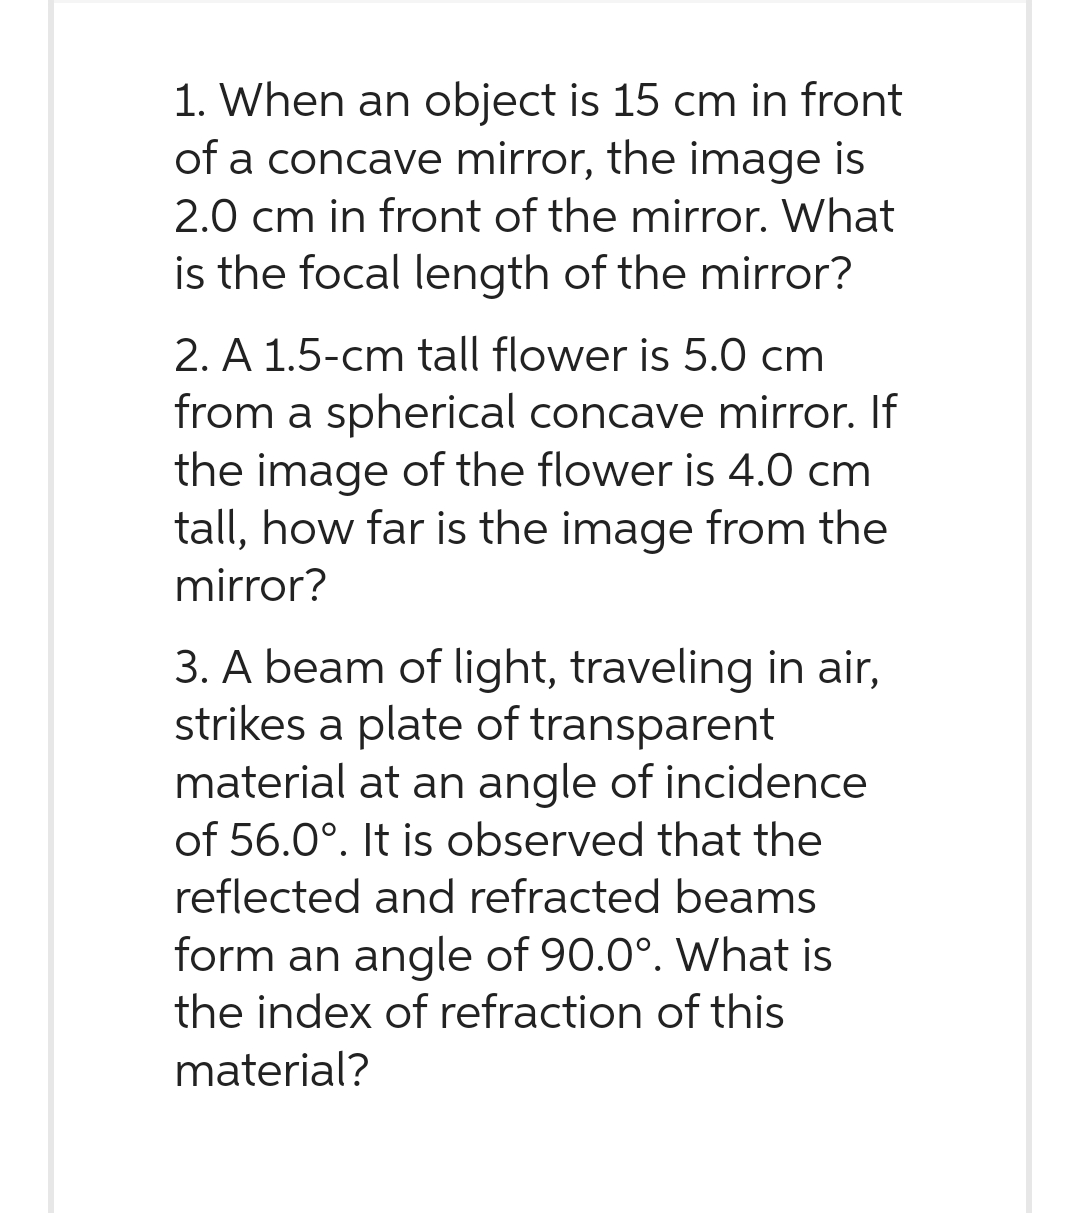 1. When an object is 15 cm in front
of a concave mirror, the image is
2.0 cm in front of the mirror. What
is the focal length of the mirror?
2. A 1.5-cm tall flower is 5.0 cm
from a spherical concave mirror. If
the image of the flower is 4.0 cm
tall, how far is the image from the
mirror?
3. A beam of light, traveling in air,
strikes a plate of transparent
material at an angle of incidence
of 56.0°. It is observed that the
reflected and refracted beams
form an angle of 90.0°. What is
the index of refraction of this
material?